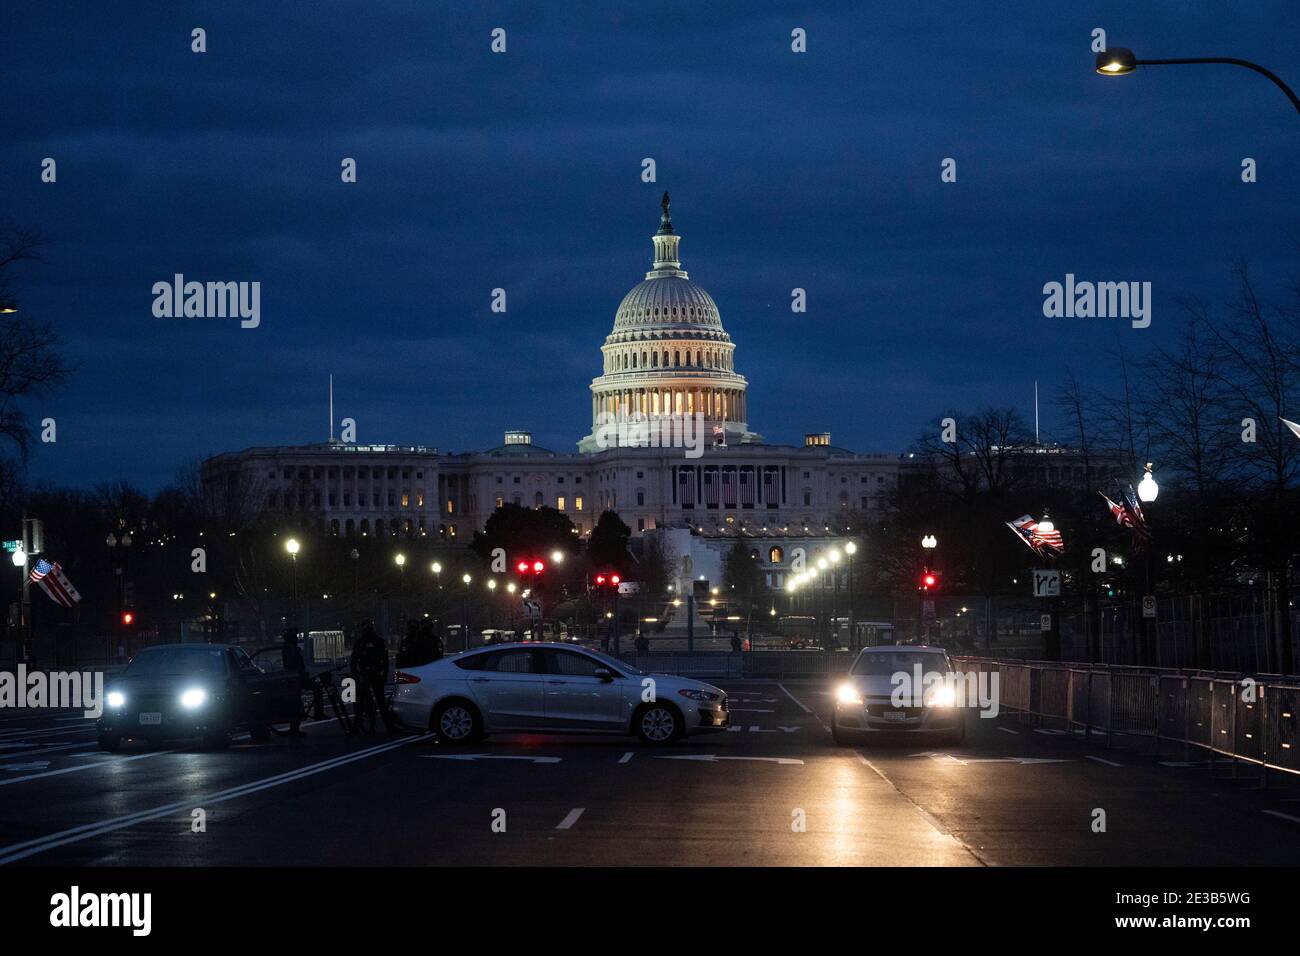 Washington, USA. 17th Jan, 2021. Photo taken on Jan. 17, 2021 shows the U.S. Capitol building in Washington, DC, the United States. Up to 25,000 National Guard members have been authorized for the city to ensure the security of Wednesday's inauguration, transforming the city into what some U.S. media called "a war zone. Credit: Xinhua/Alamy Live News Stock Photo